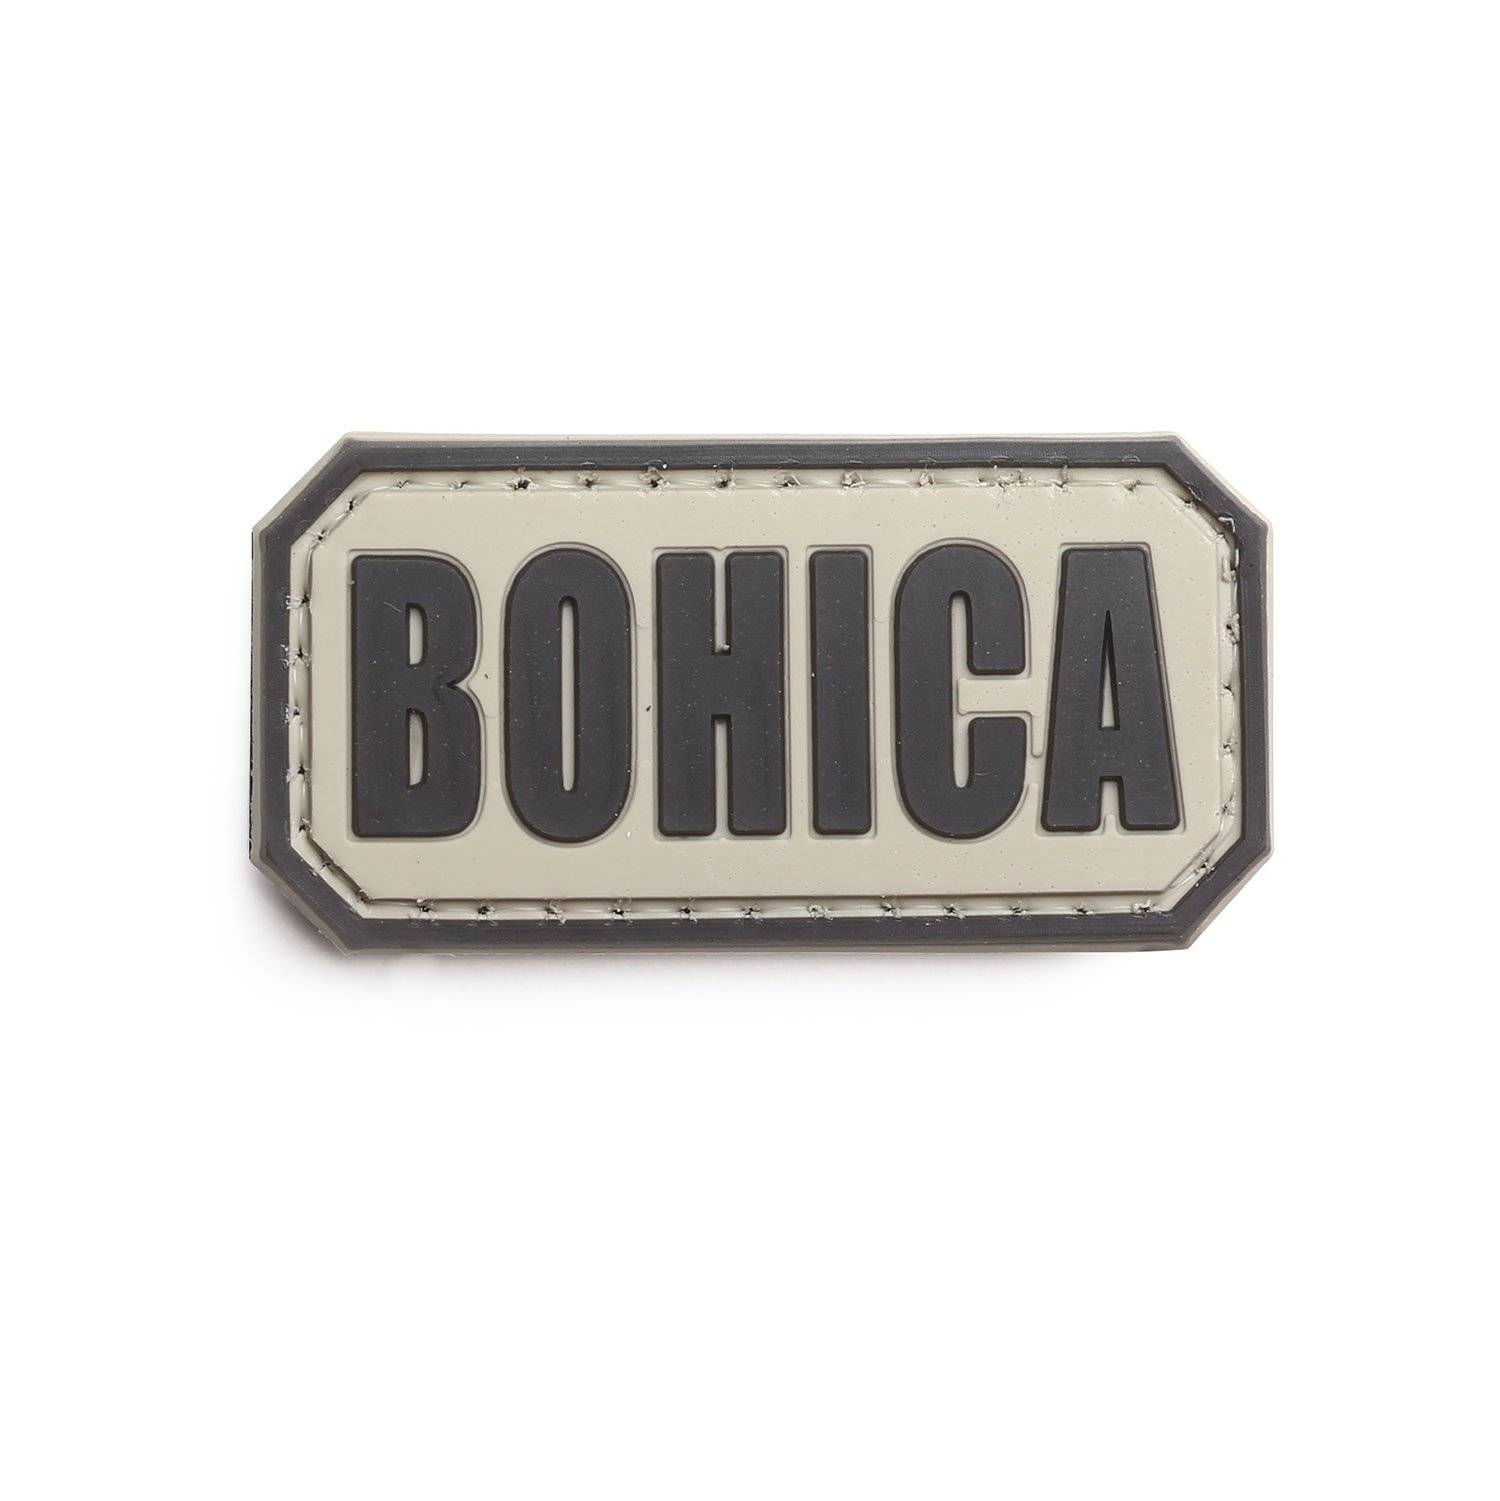 5ive Star Gear “BOHICA” Morale Patch